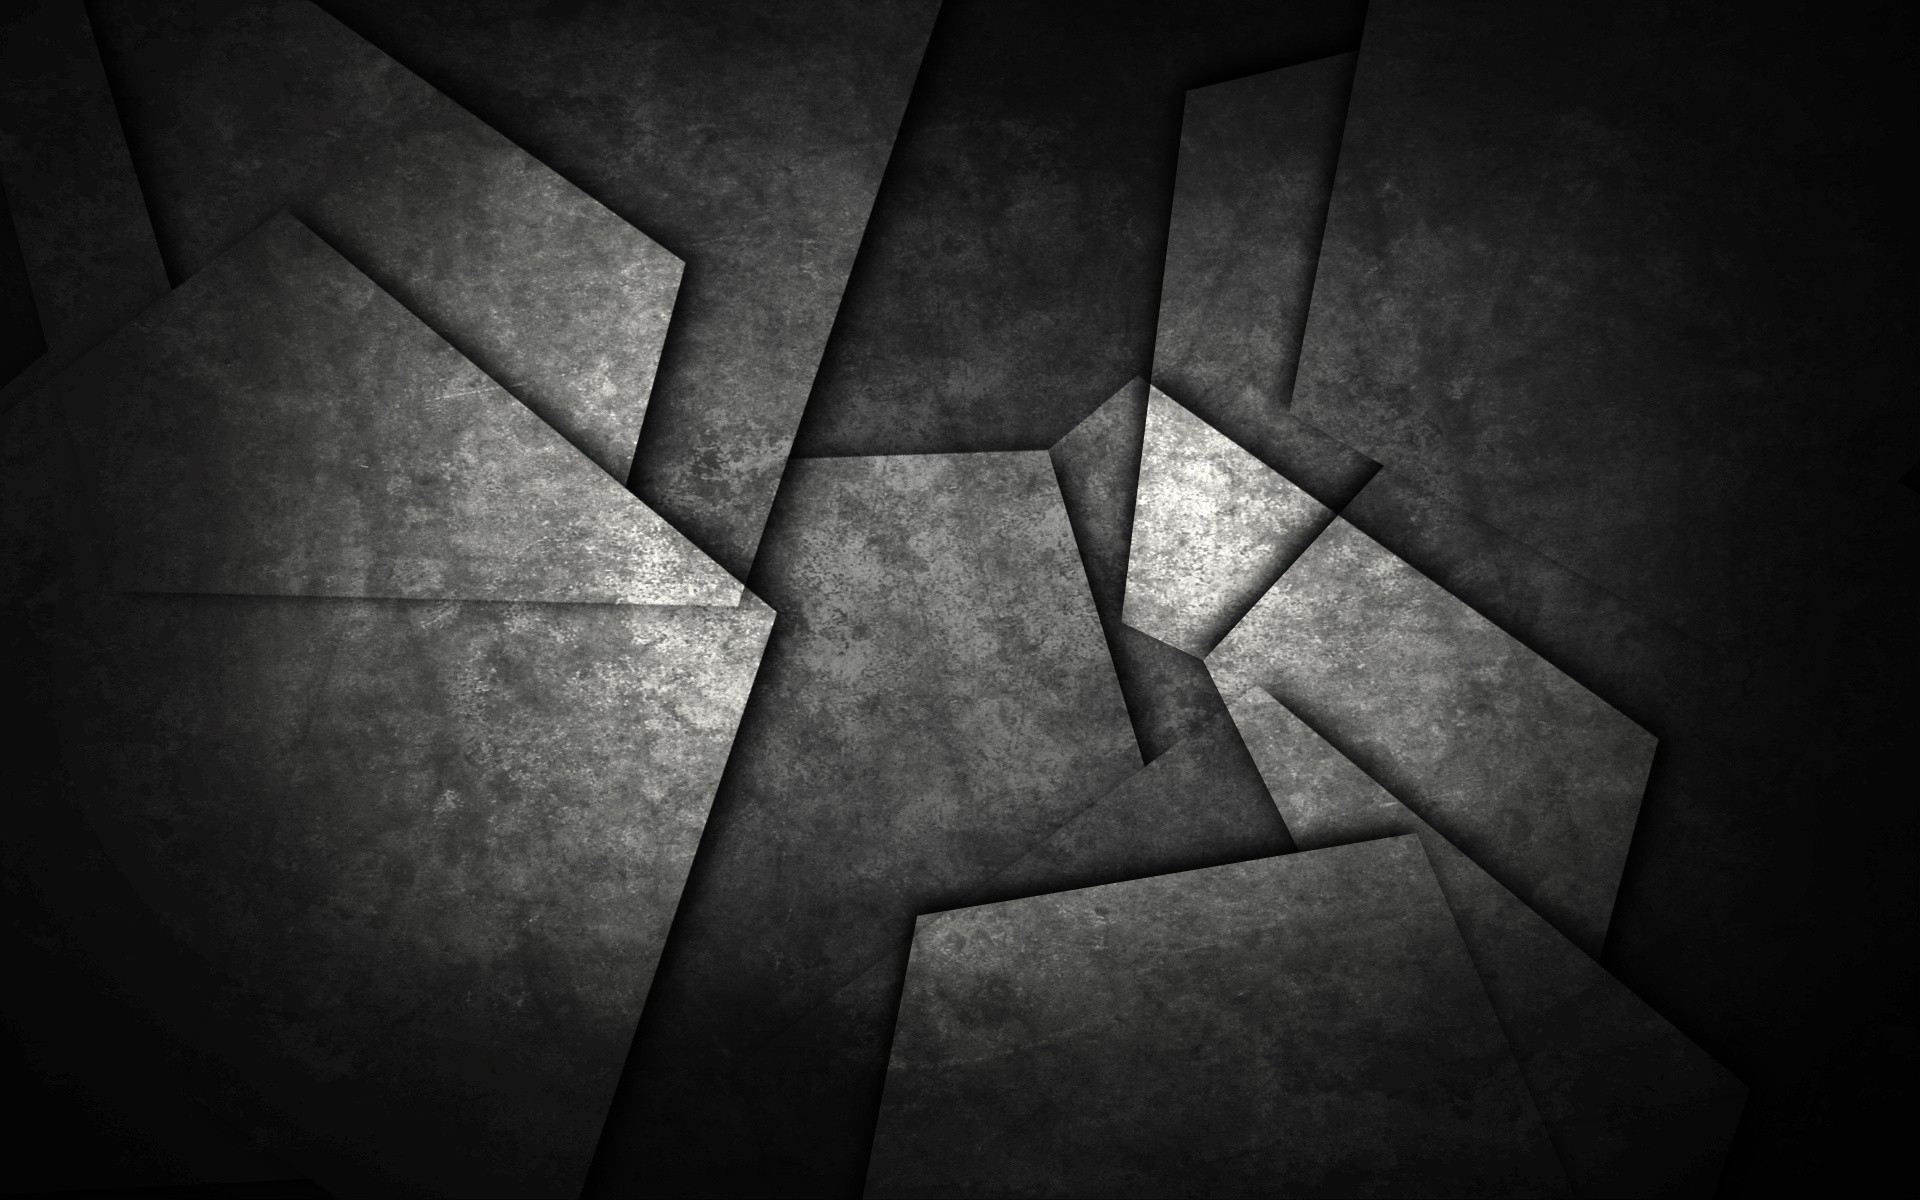 Geometric shapes, shapes, greys and textures. Love this wallpaper